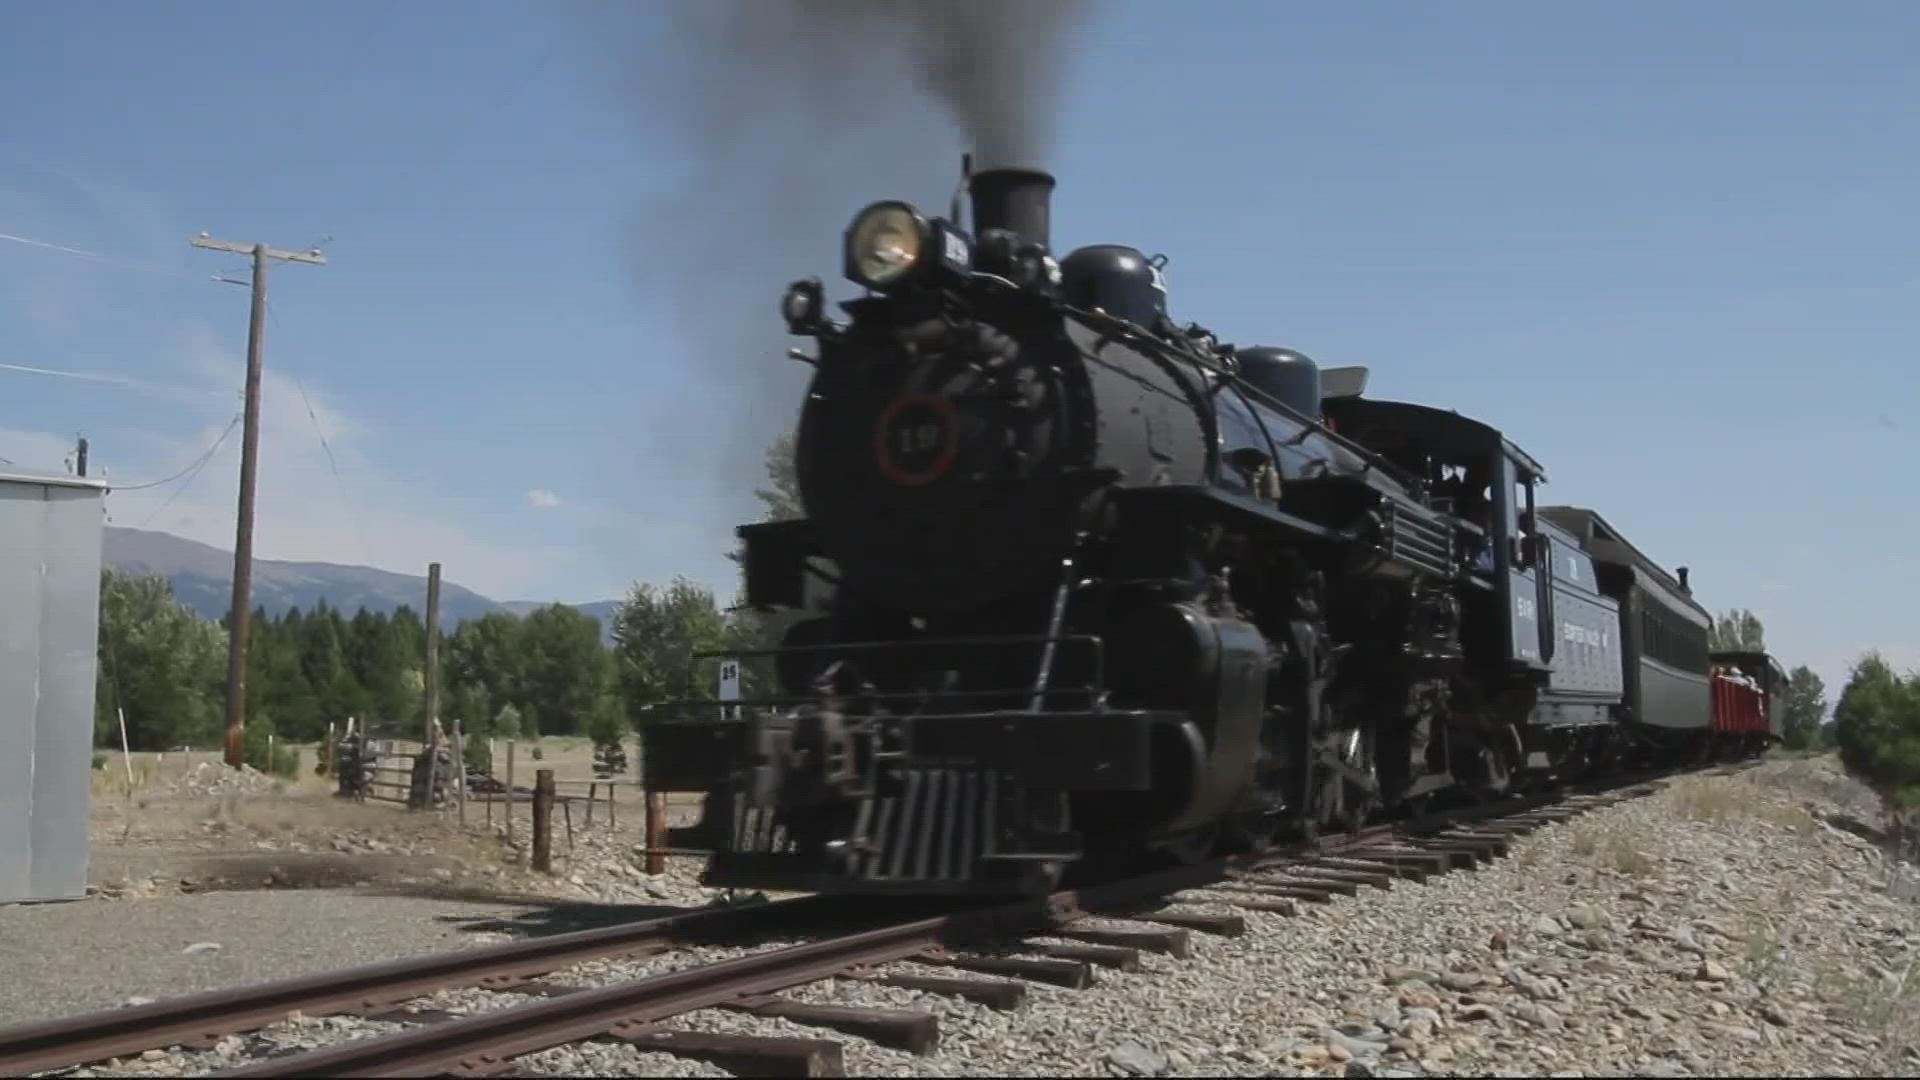 Grant McOmie explores the Sumpter Valley Railroad. The corridor also connects to off-road trail adventures.